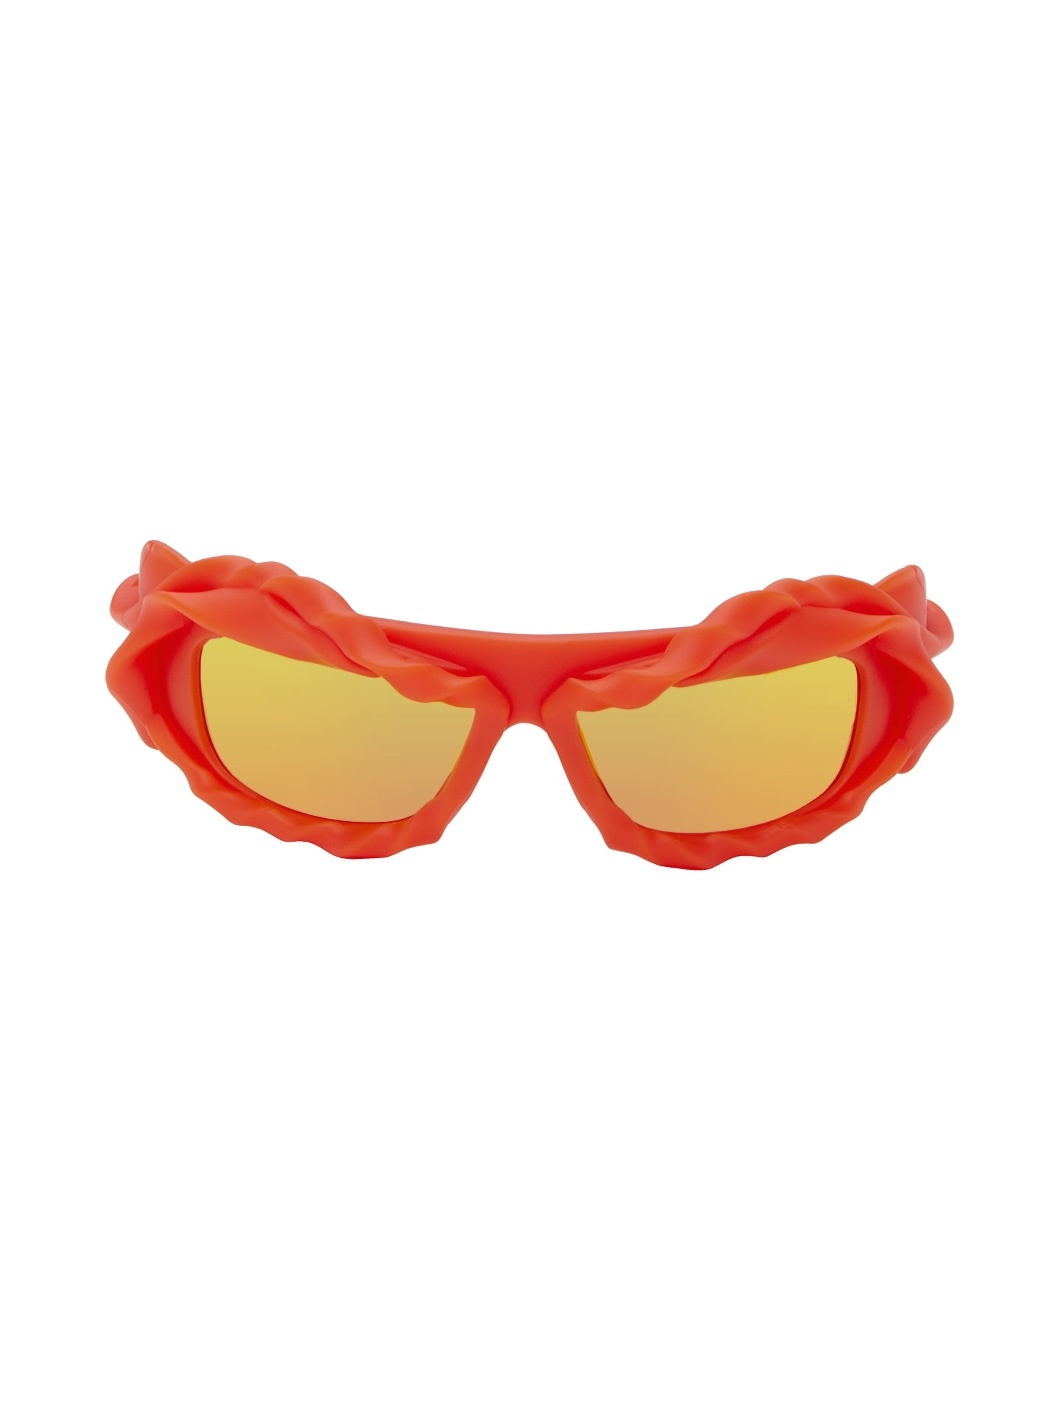 SSENSE Exclusive Red Twisted Sunglasses - 1